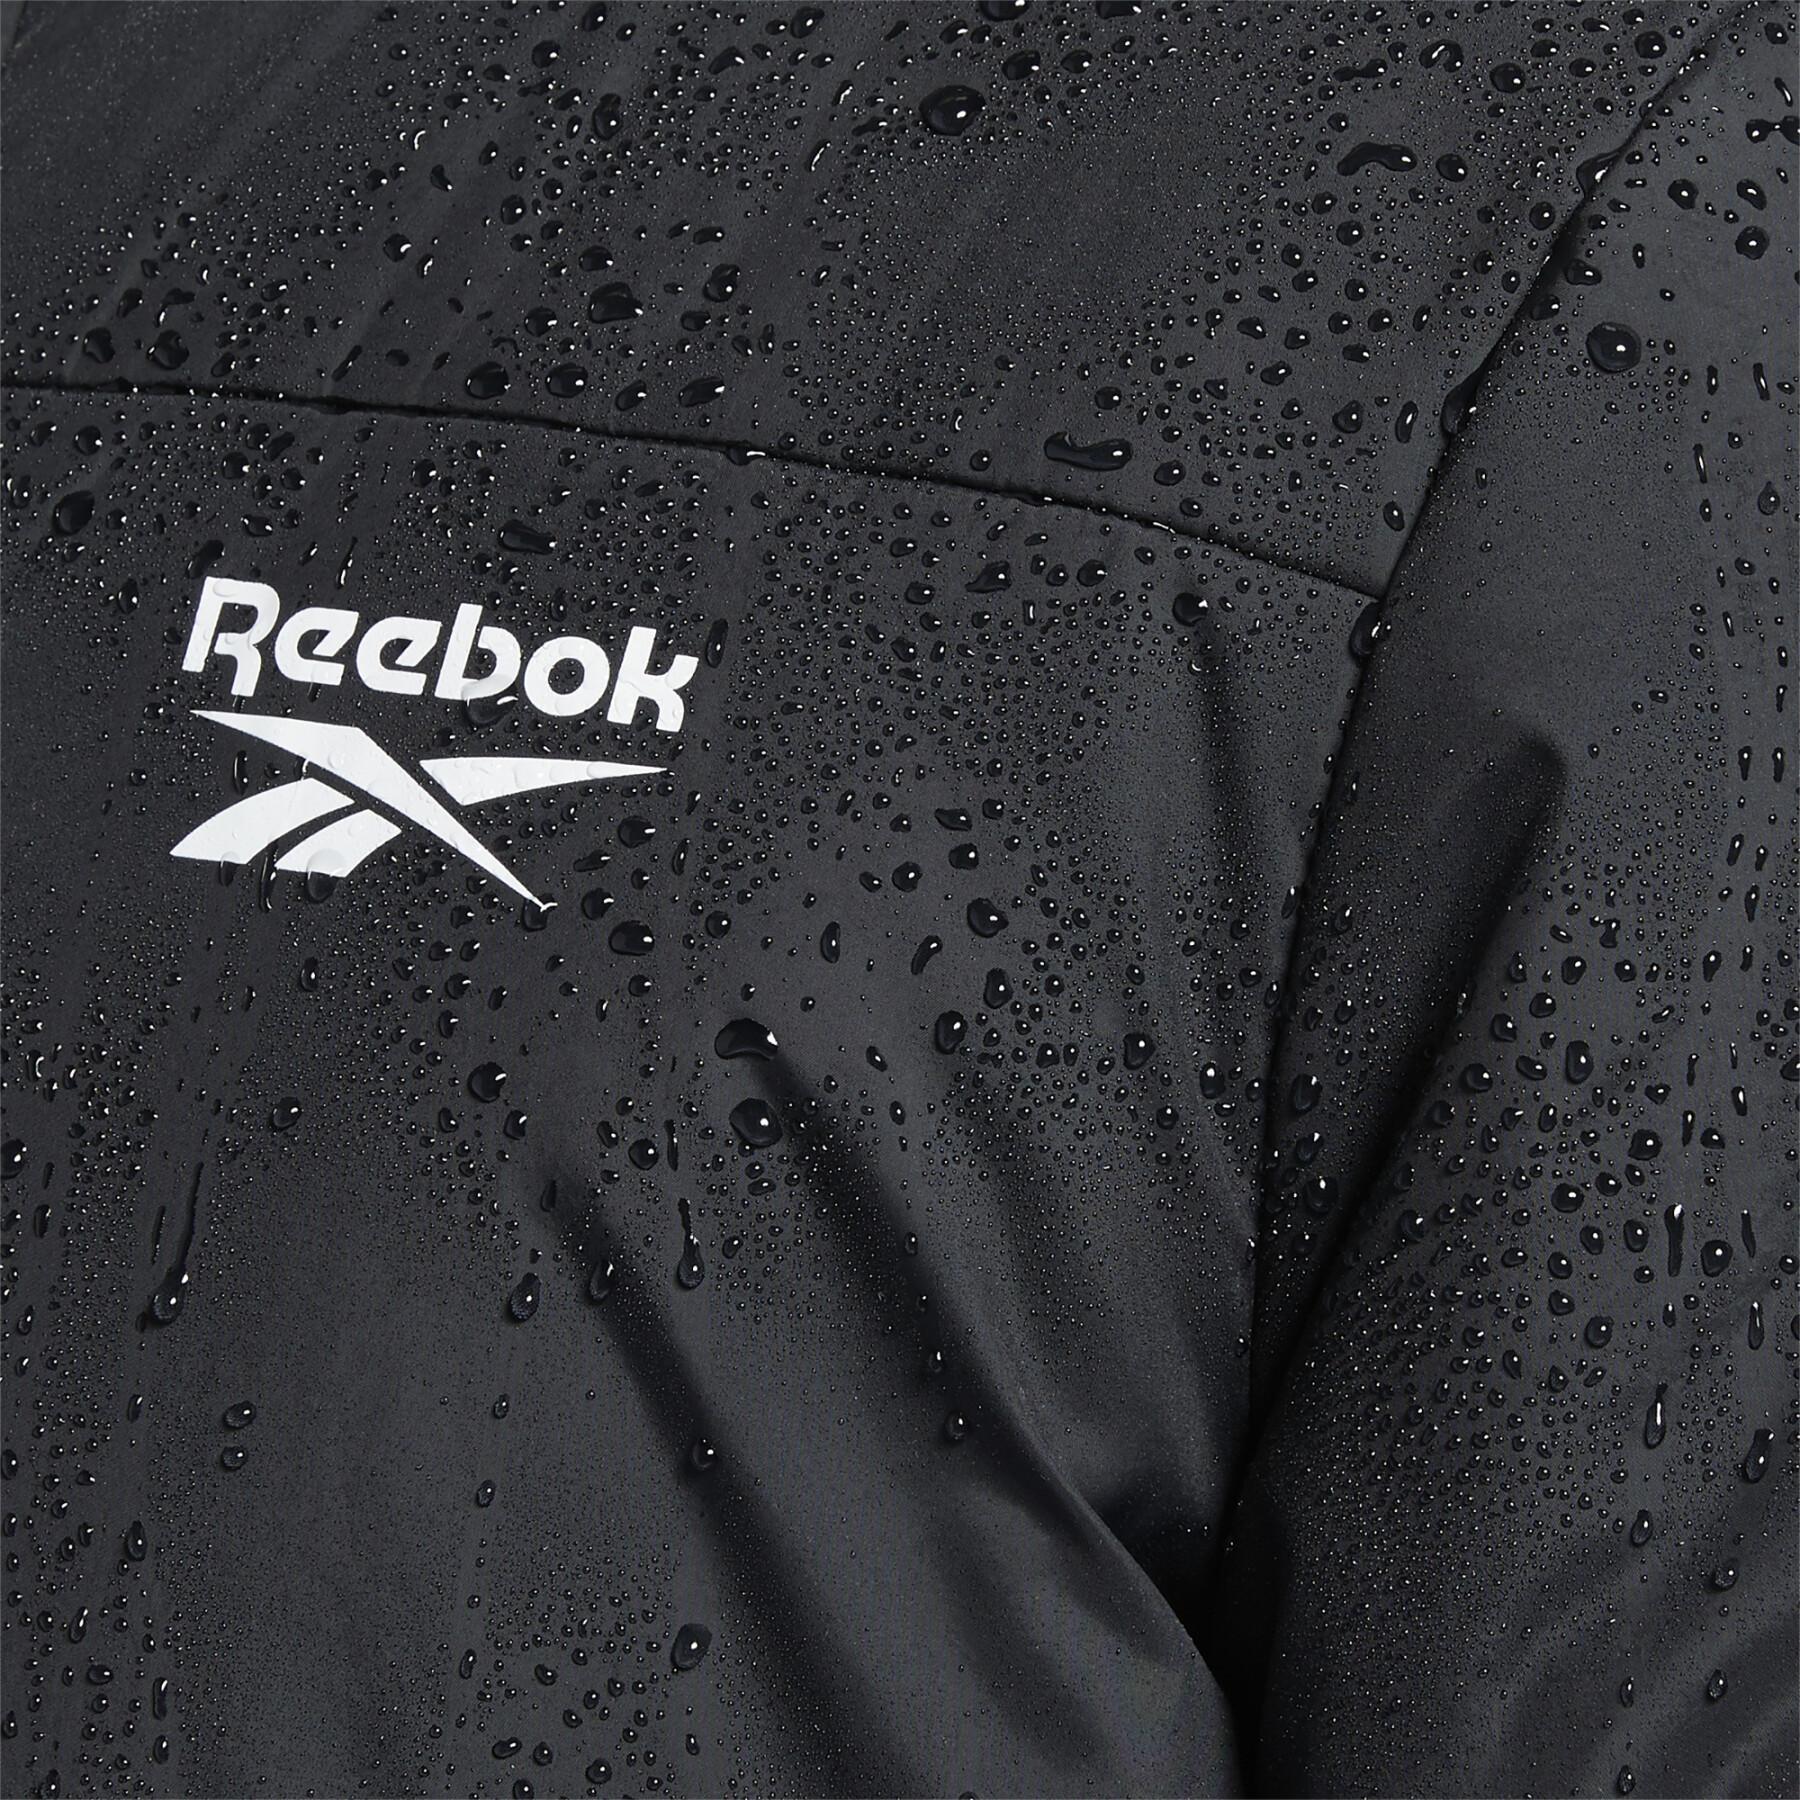 Quilted jacket Reebok Outwear Thermowarm+Graphene